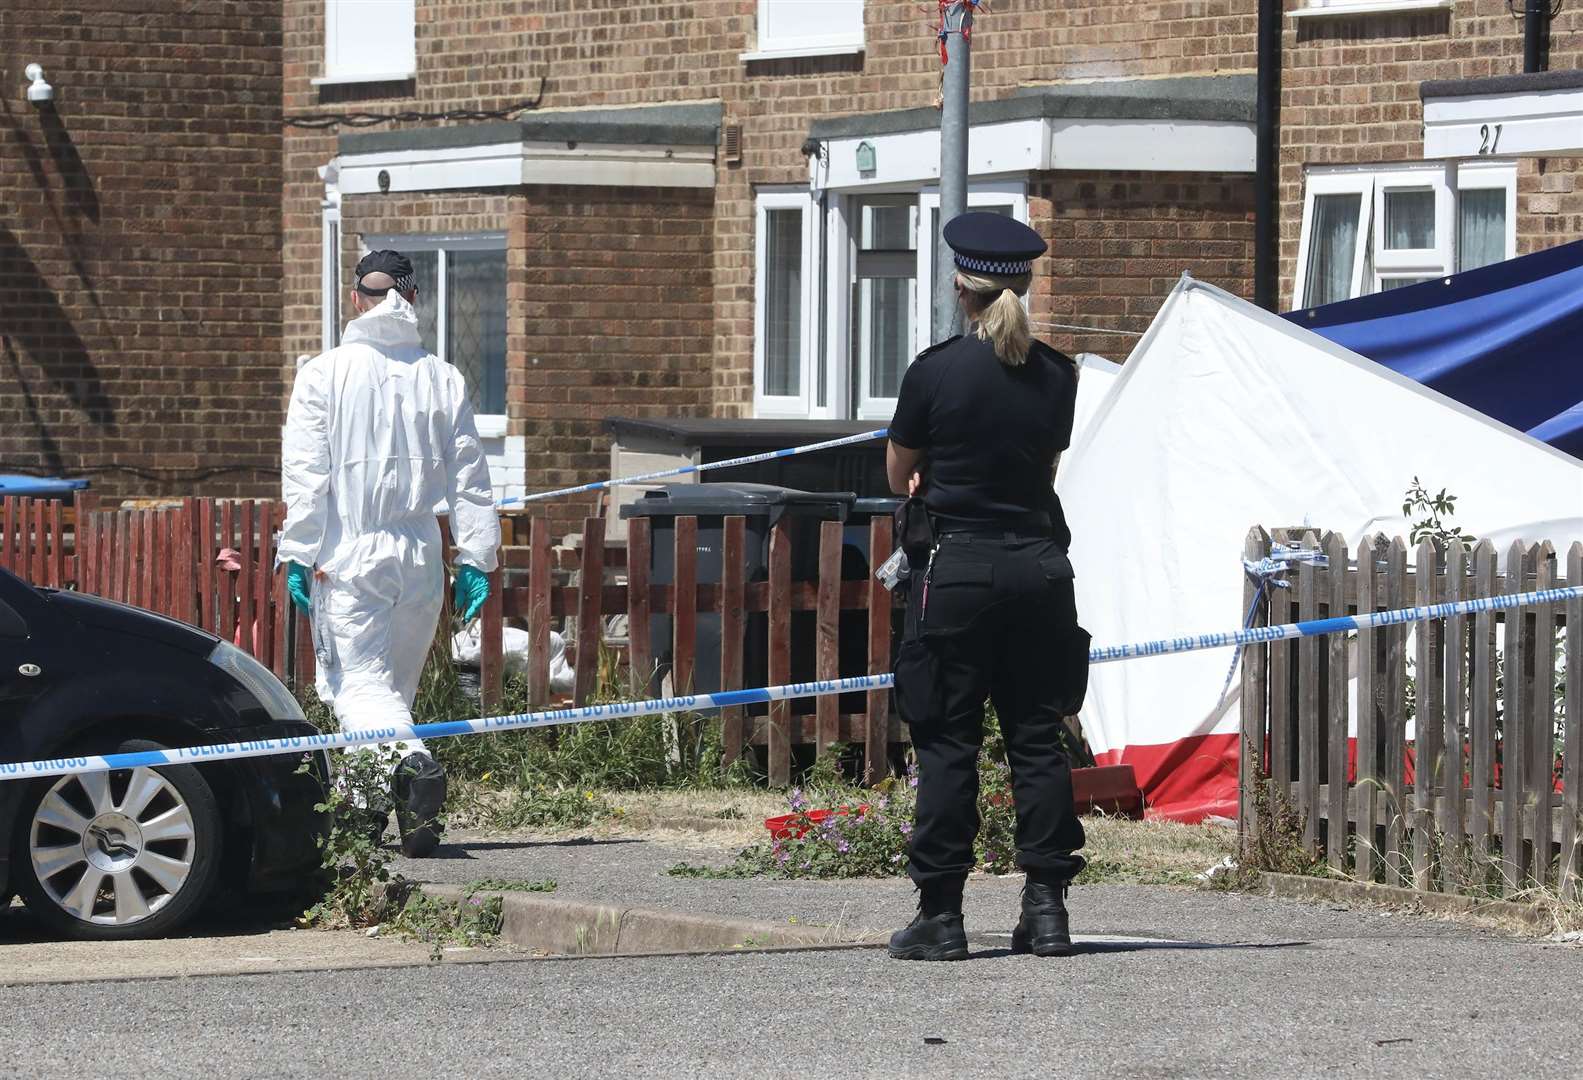 Police and forensics in Elfrida Close in the aftermath of the death. Picture: UKNIP